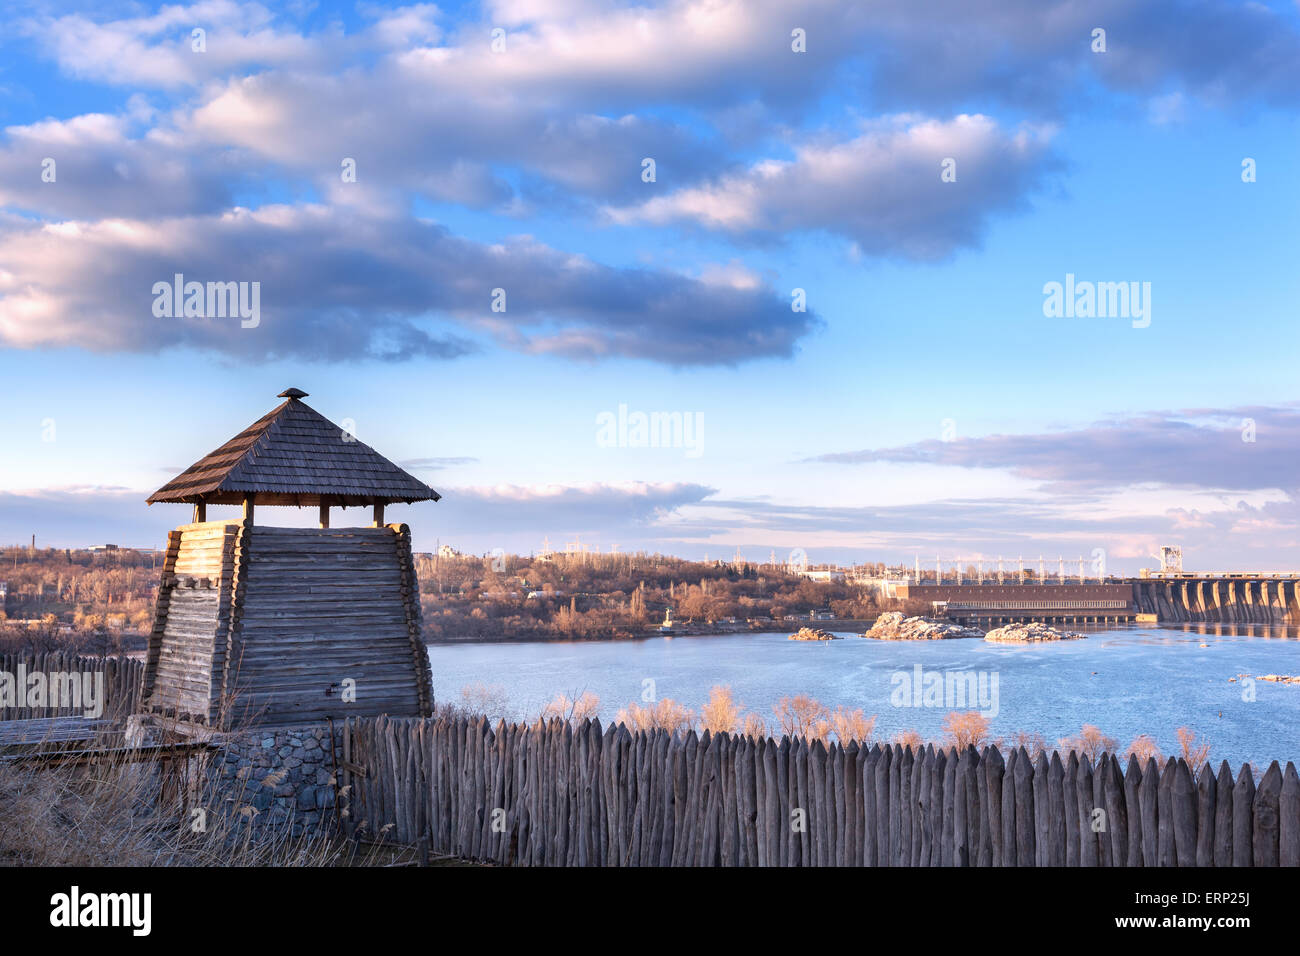 Old wood rustic church building and wooden fence against blue sky at sunset Stock Photo